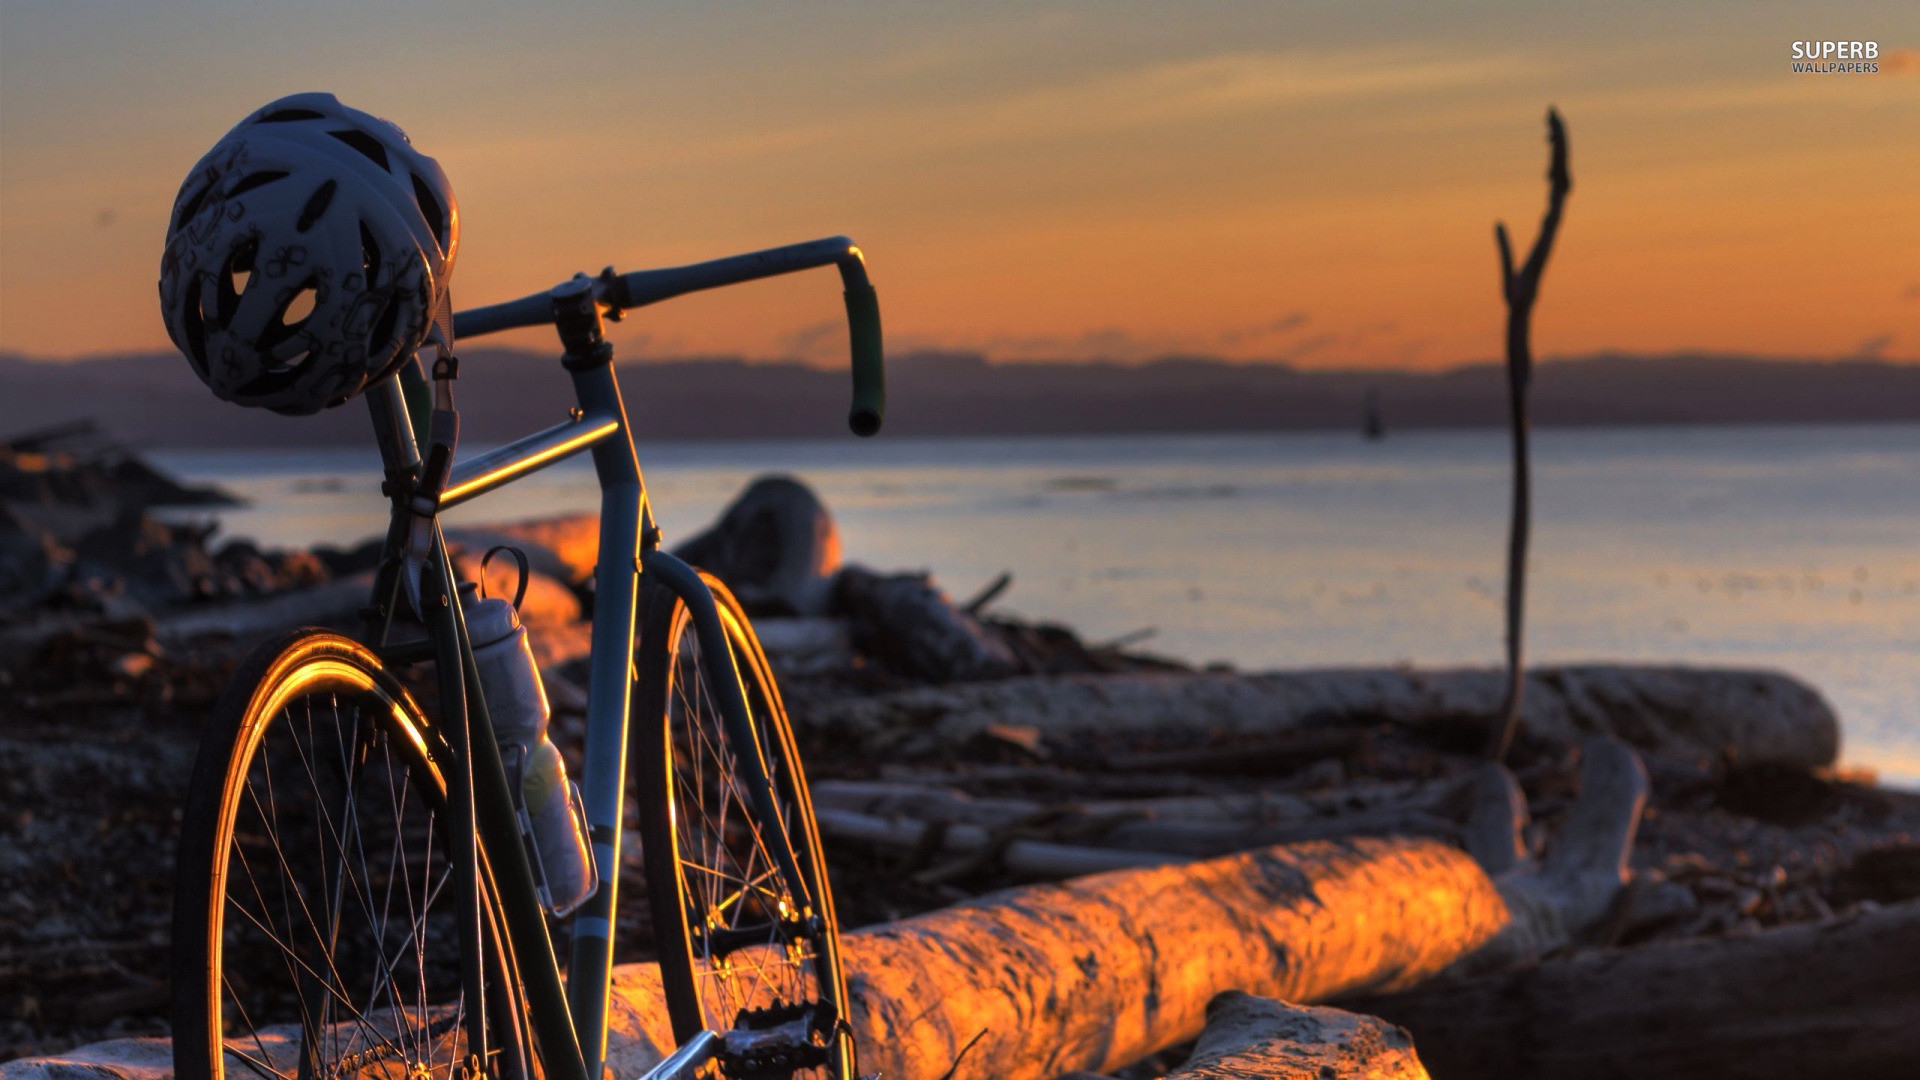 Bicycle In The Sunset Wallpaper 1920×1080